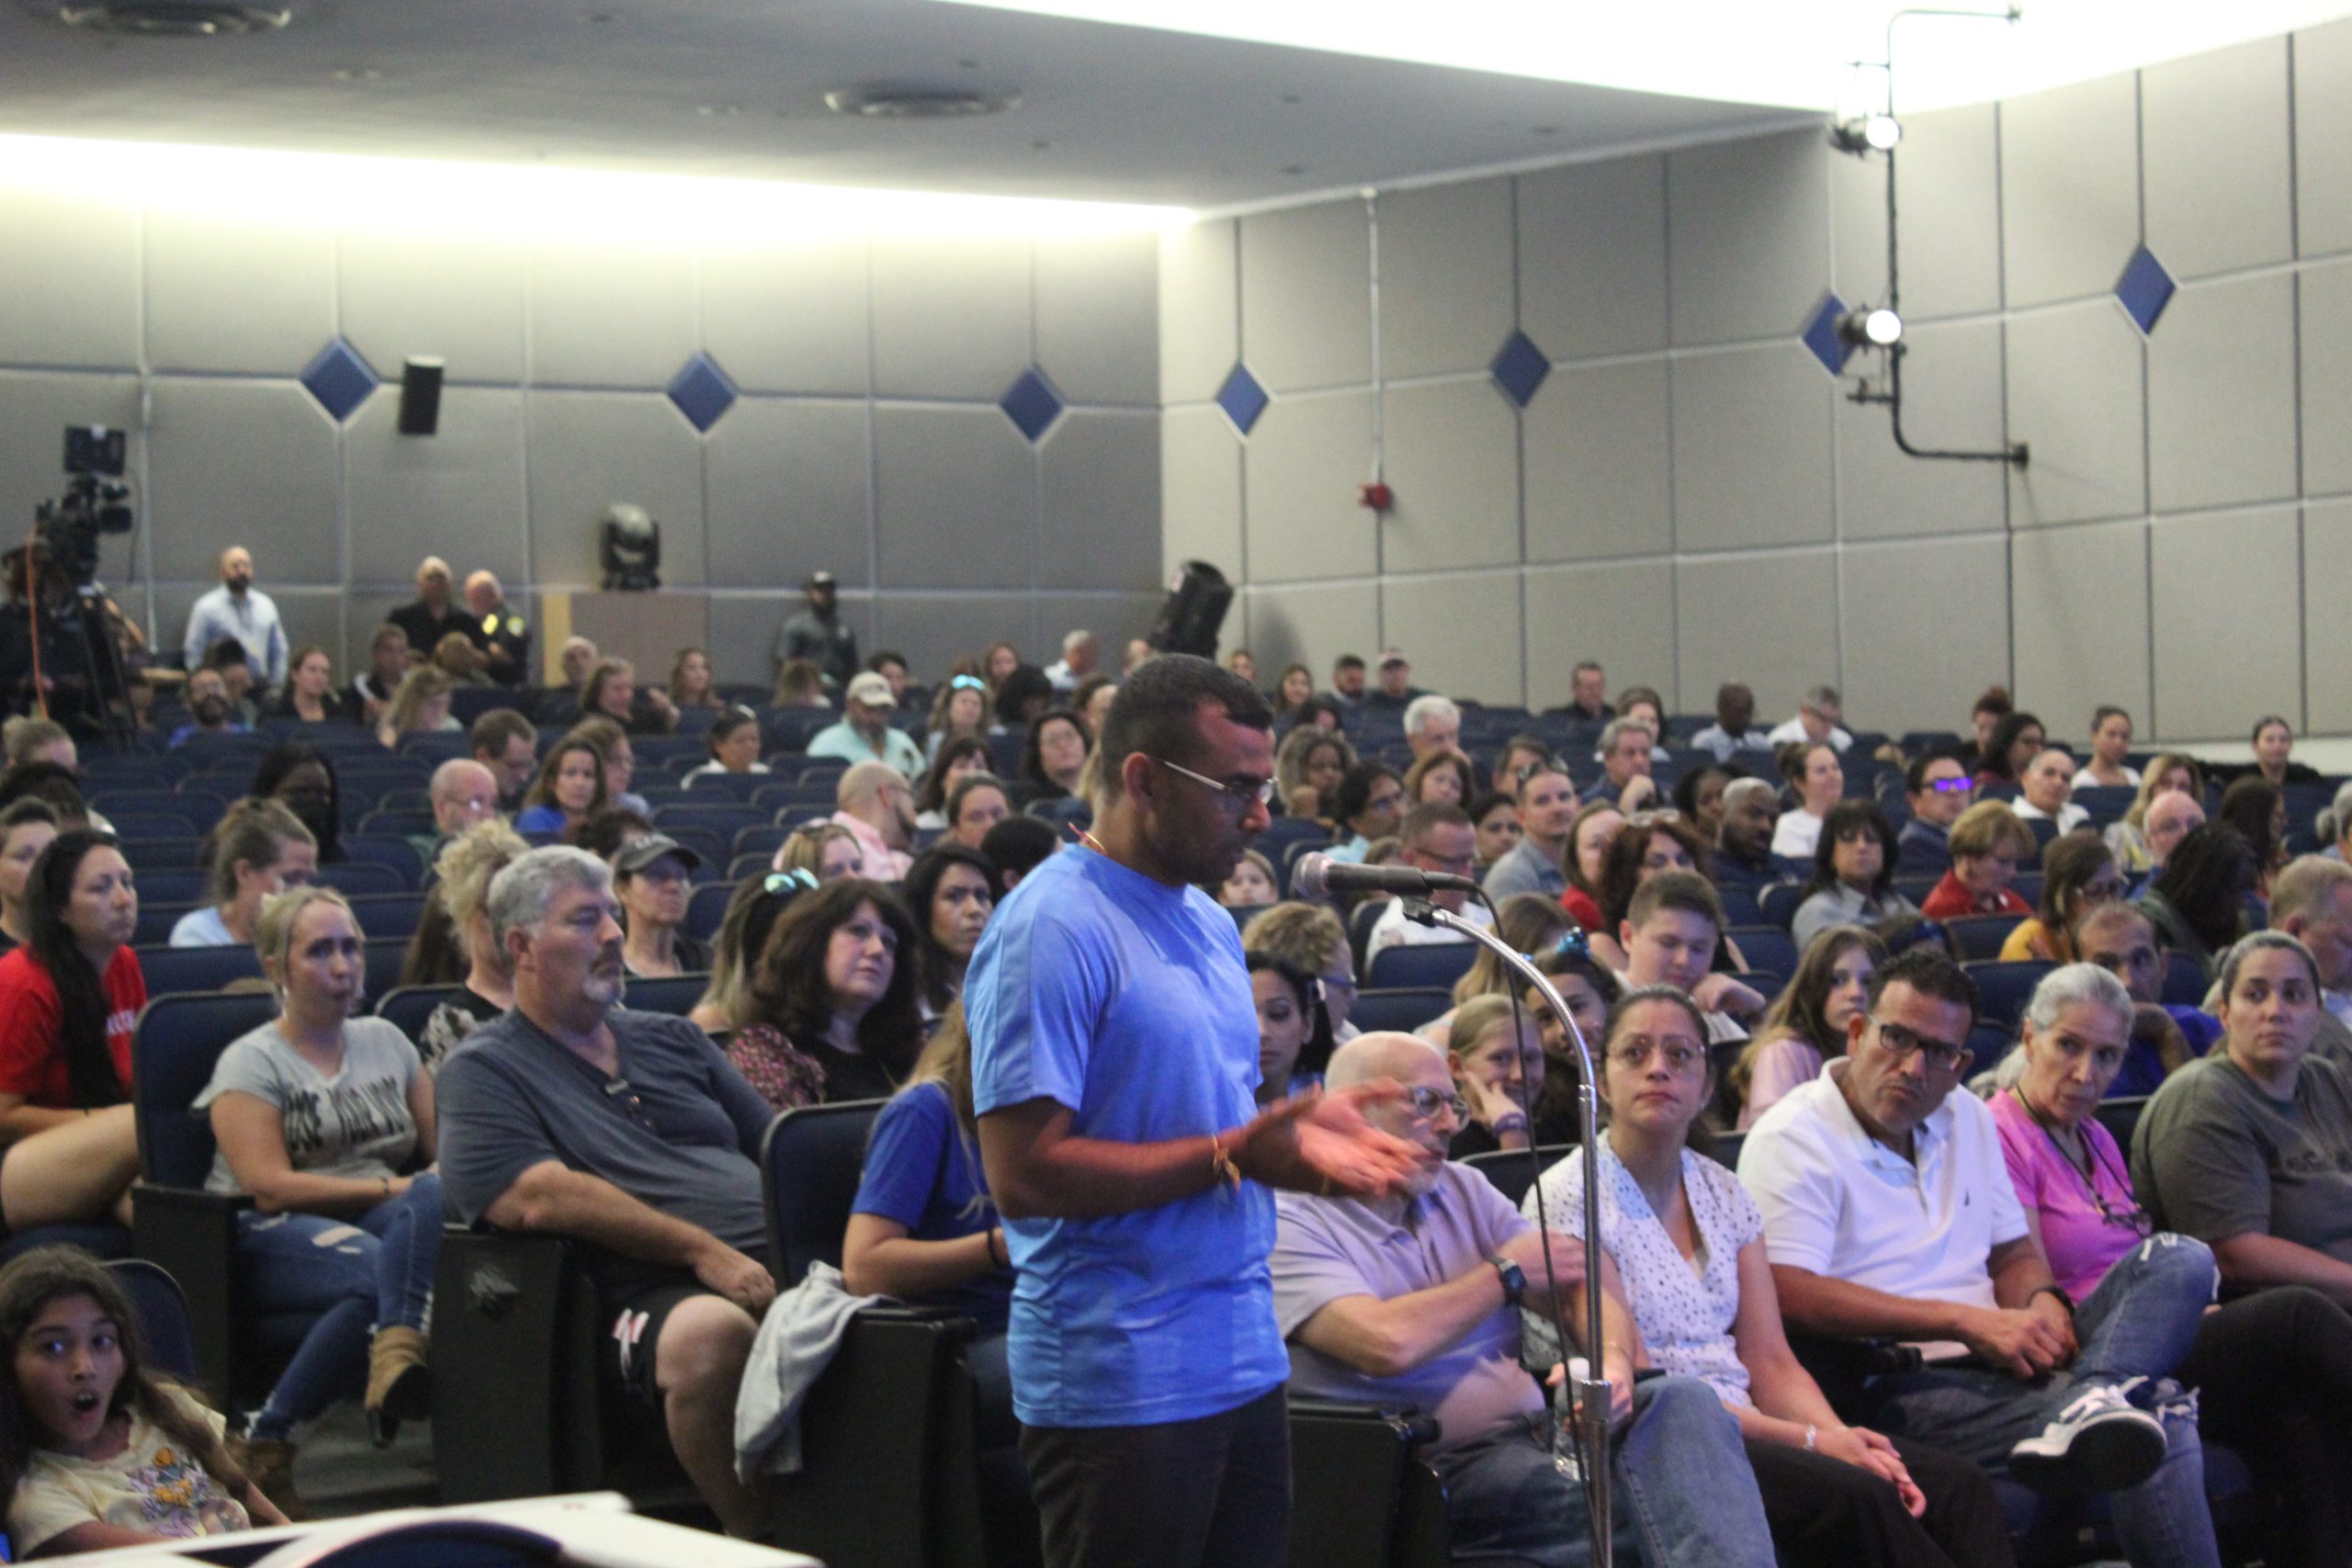 A concerned parent addresses the Broward County Public School Board at the March 29 boundary meeting about possible solutions to the dispute over the proposed change. The meeting lasted several hours and went from 5:30 p.m. to 11:30 p.m.